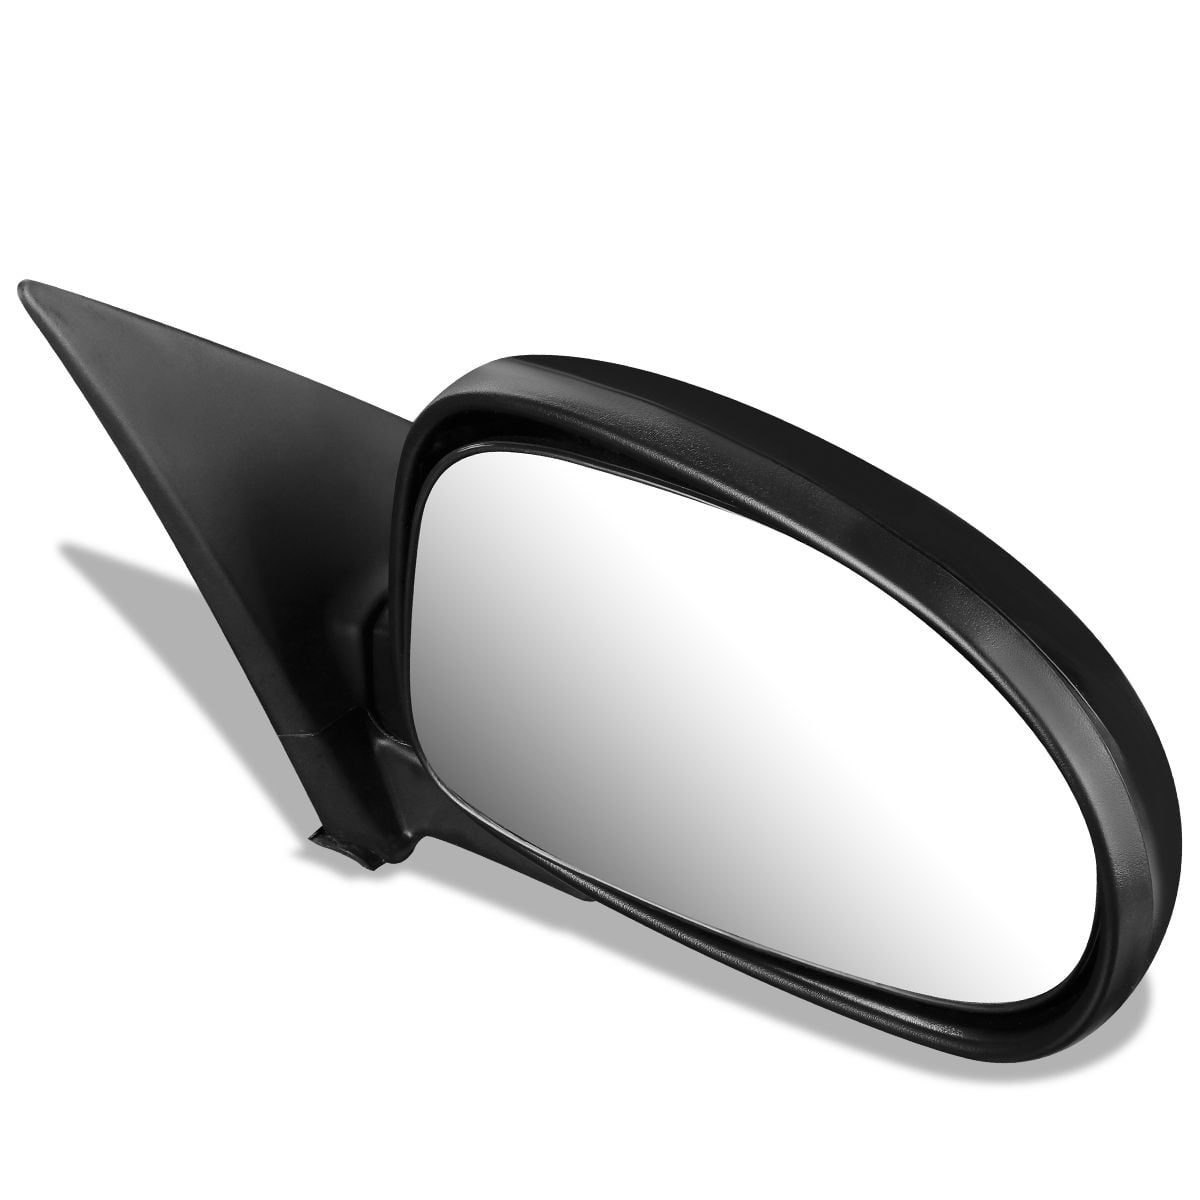 Passenger Side CONVEX Mirror GLASS FOR 2000 2001 2002 2003 Nissan Maxima 